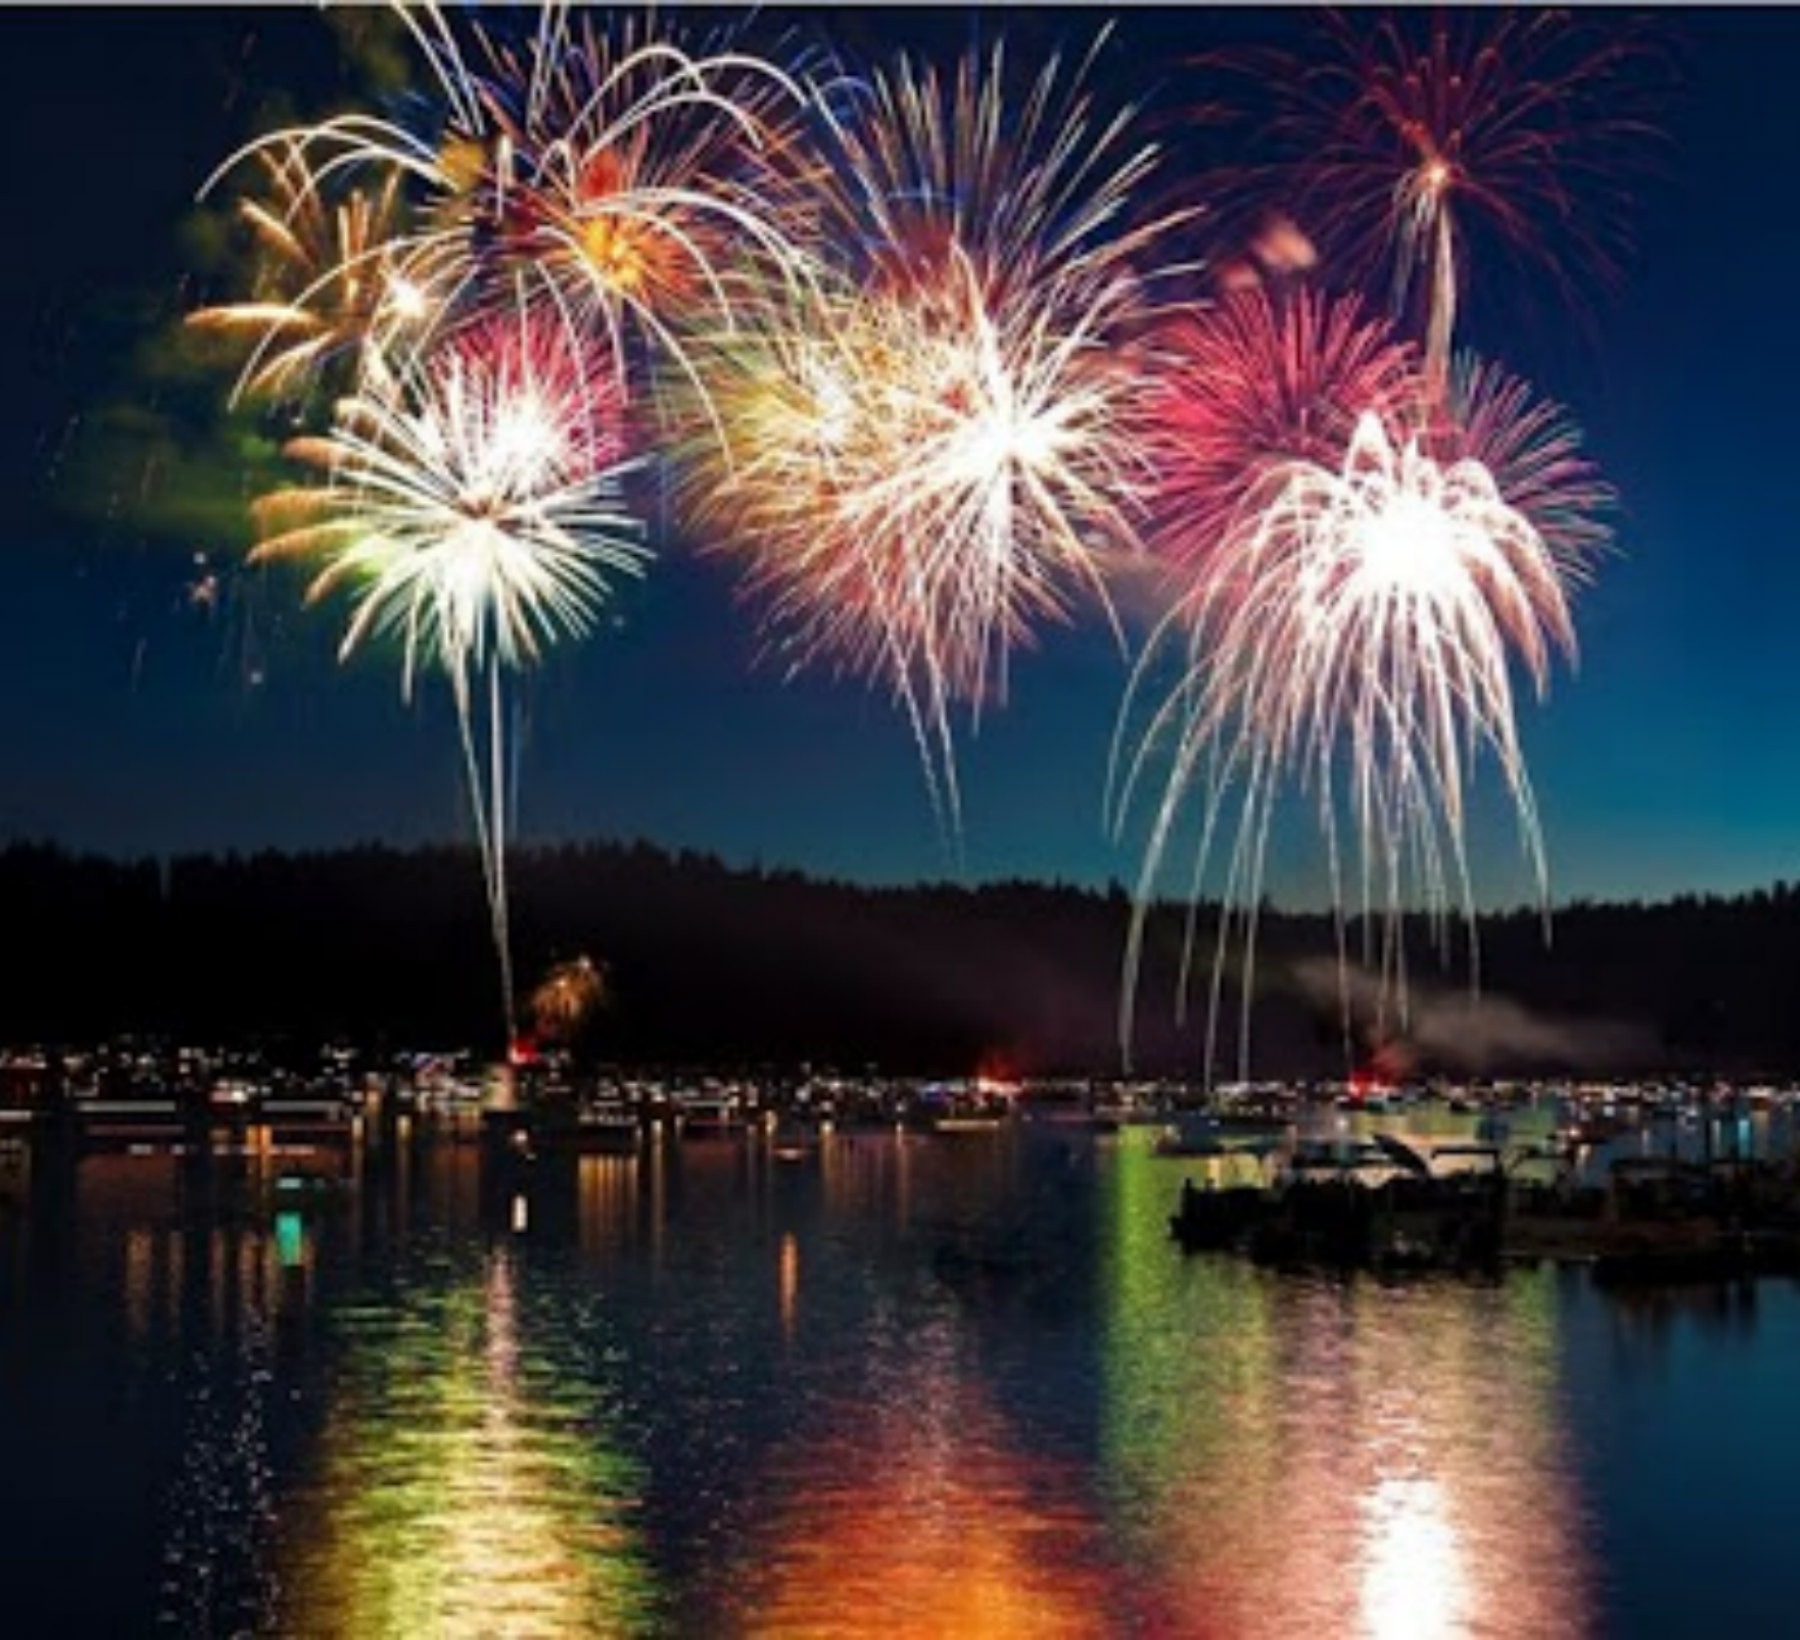 No Fourth of July fireworks in Tahoe